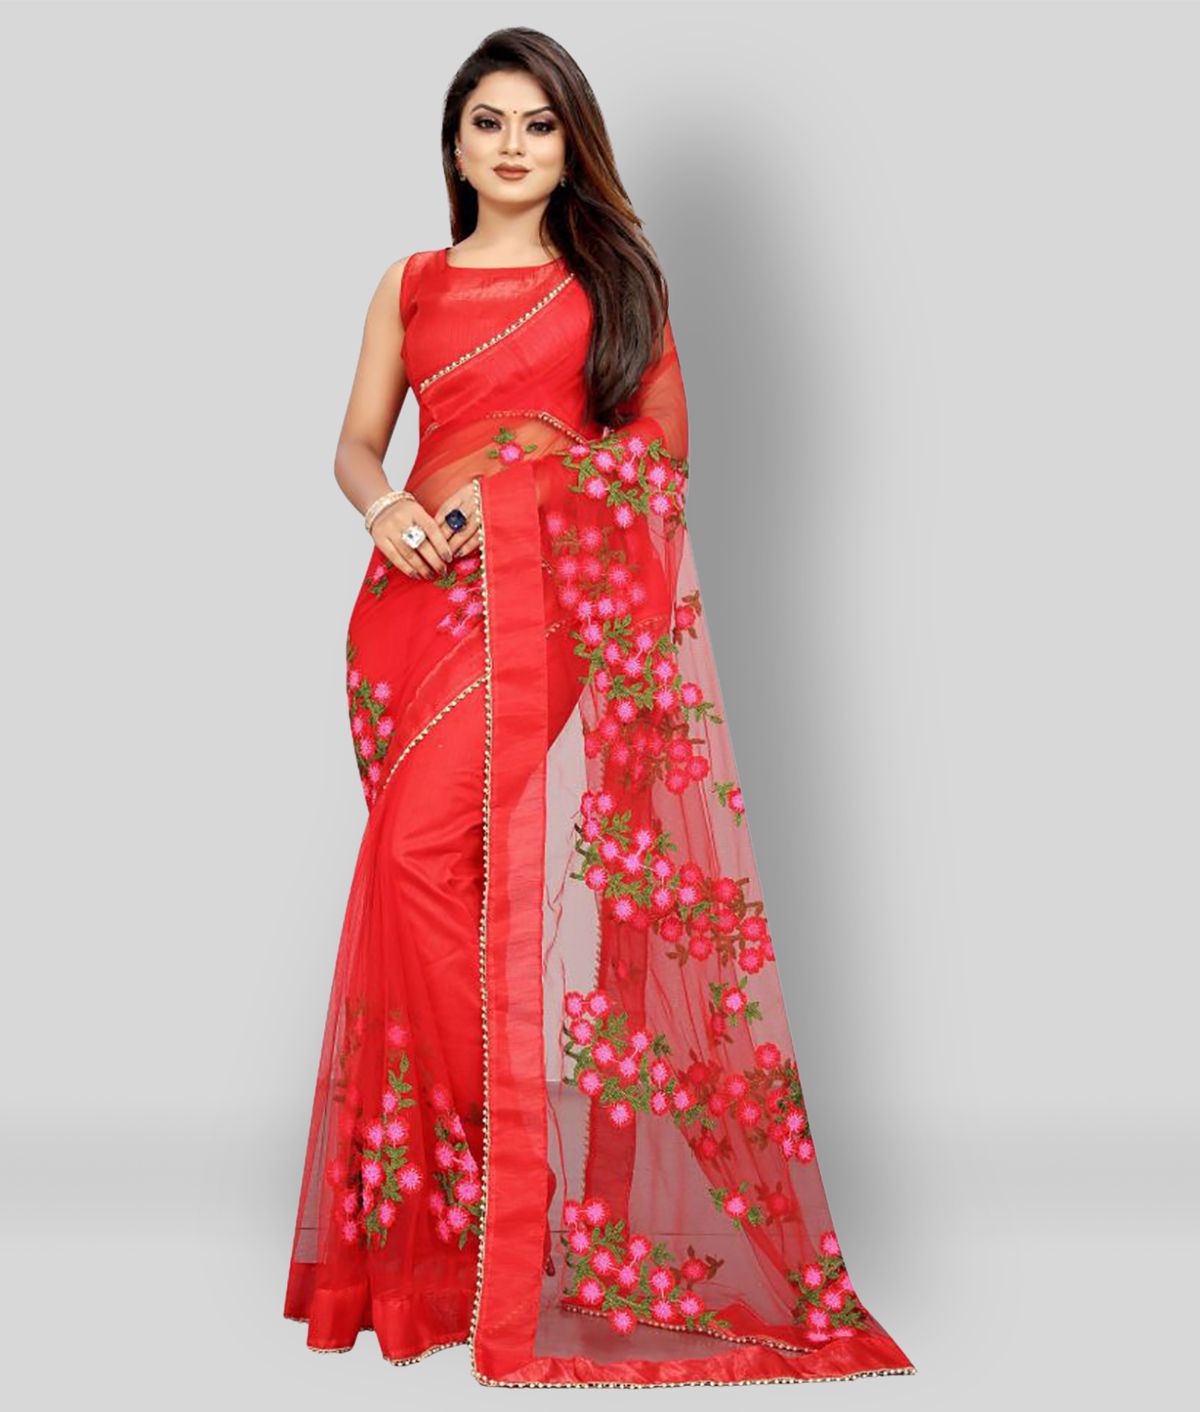 Gazal Fashions - Red Net Saree With Blouse Piece (Pack of 1)